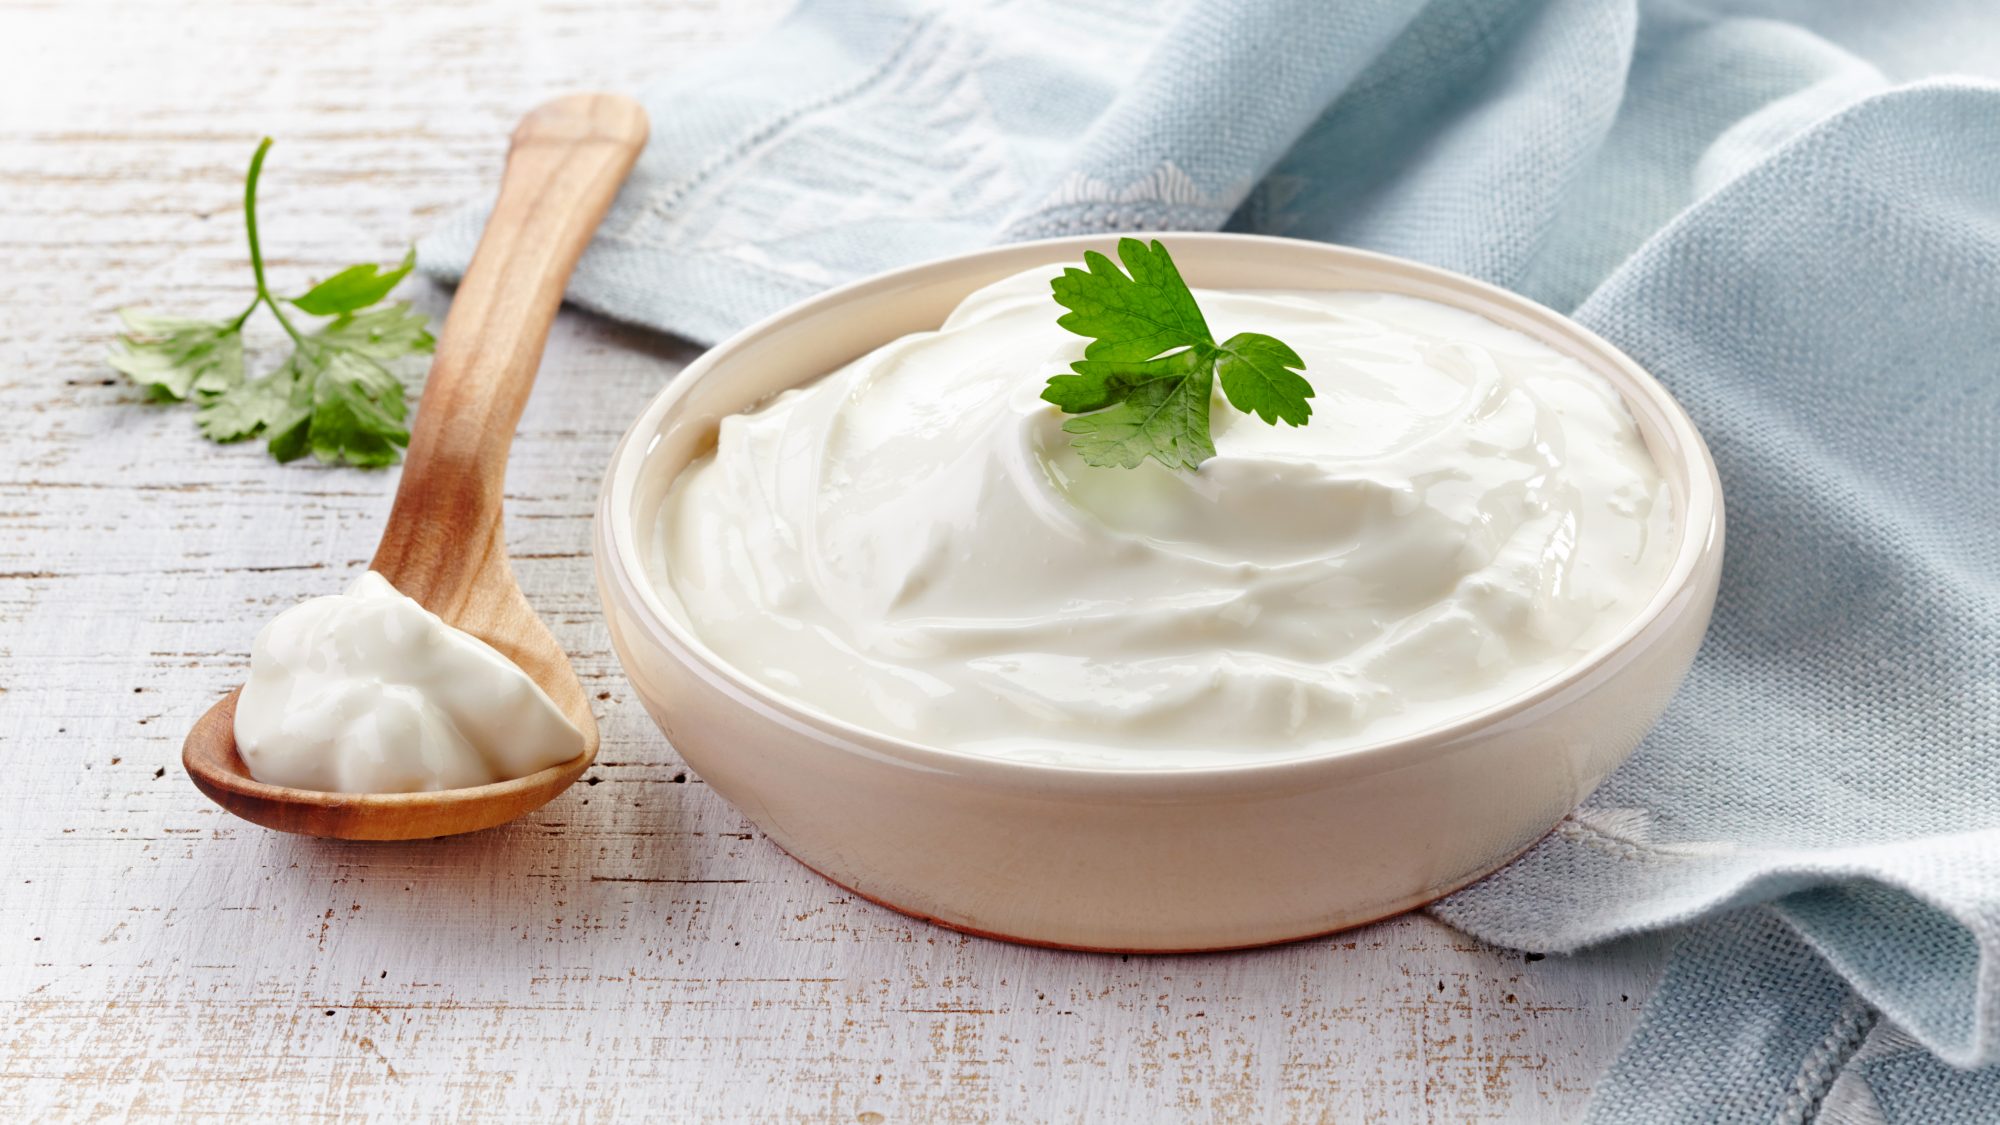 Does Sour Cream Influence Pregnancy?